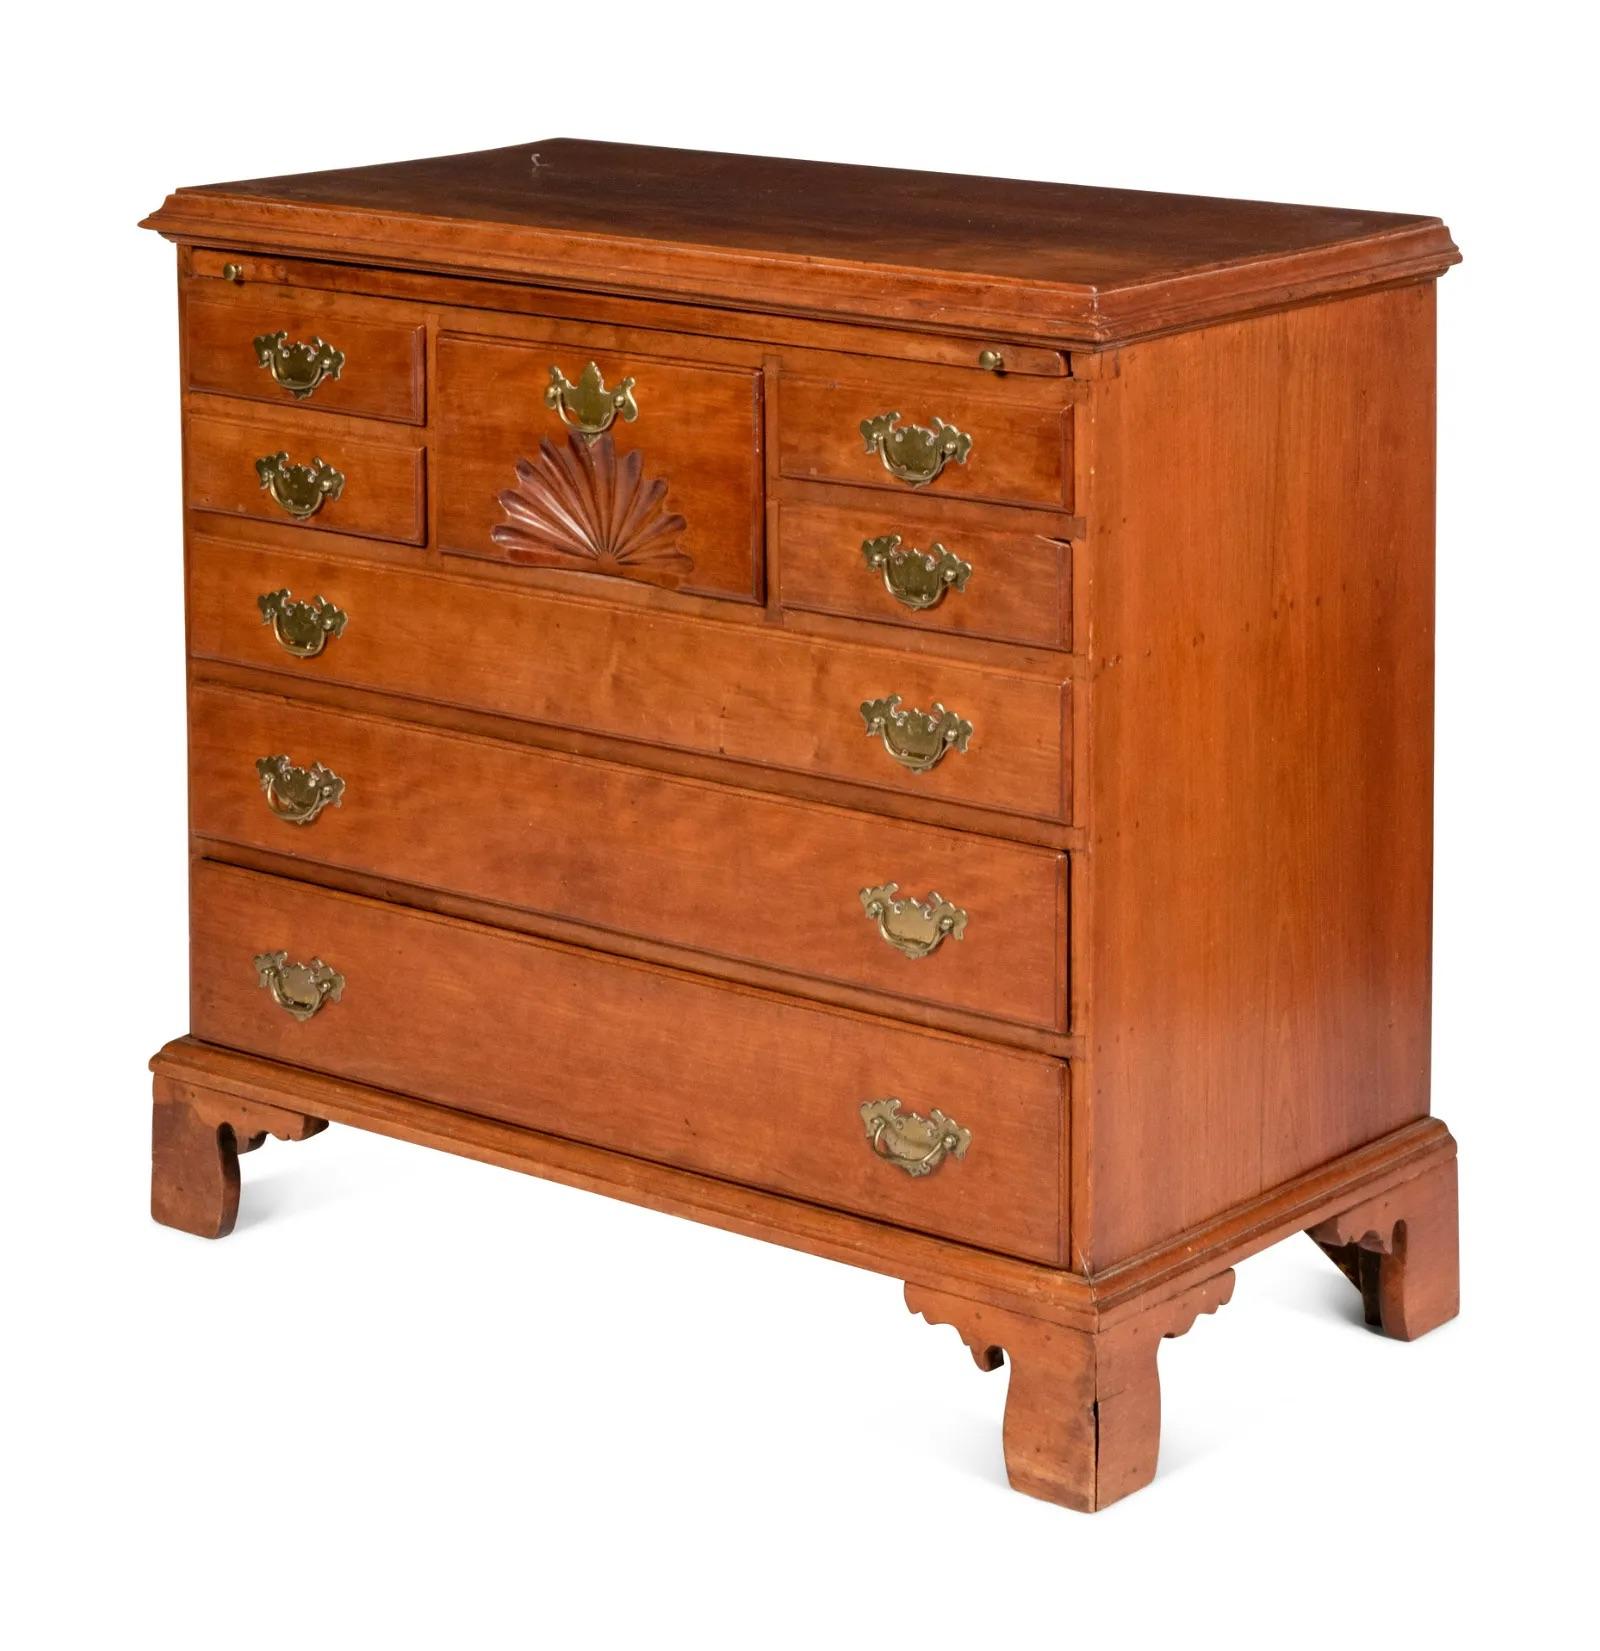 Antique American Chippendale Fan-Carved Walnut Bachelor's Chest. Likely New England, 19th Century. The fan-carved drawer flanked by 2 drawers on either side and above three long graduated drawers. This chest incorporates earlier elements. Excellent